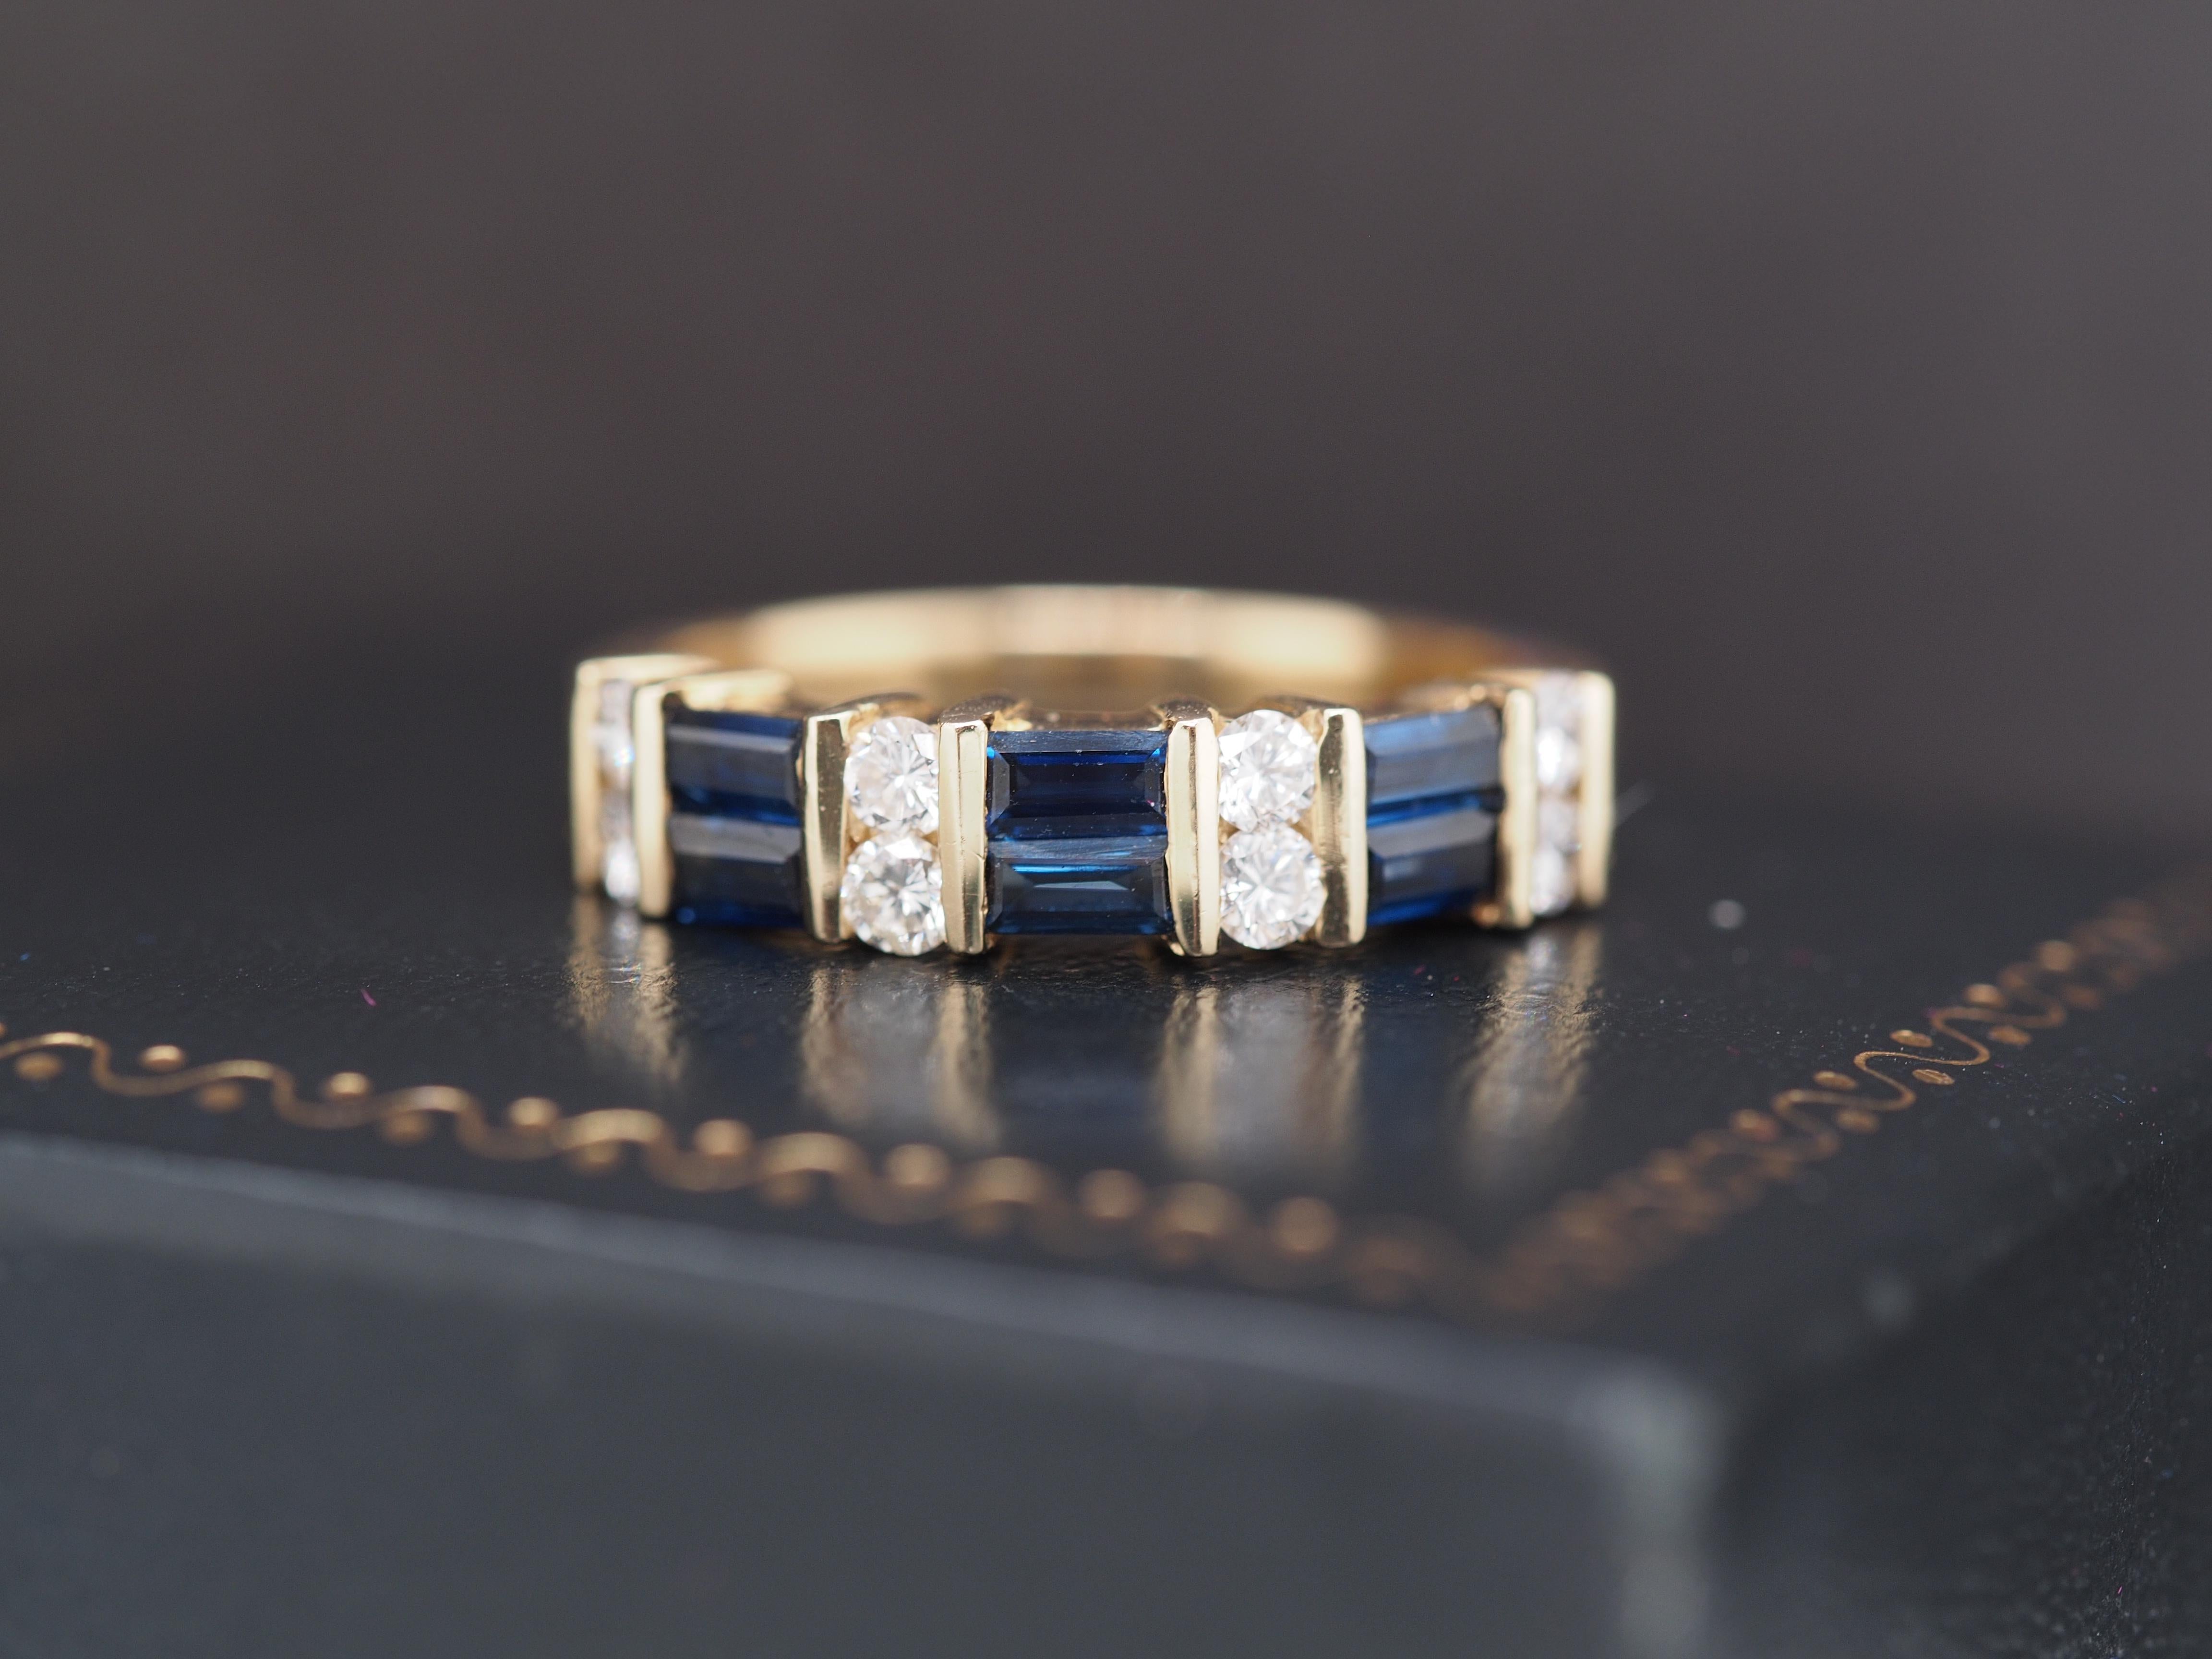 Item Details:
Ring Size: 6.25
Metal Type: 14K Yellow Gold [Hallmarked, and Tested]
Weight: 4.0 grams
Diamond and Sapphire Details
Sapphire Details: Natural, Straight Baguette, .60ct total weight, Blue
Side Diamonds: .50ct total weight, G-H Color, VS